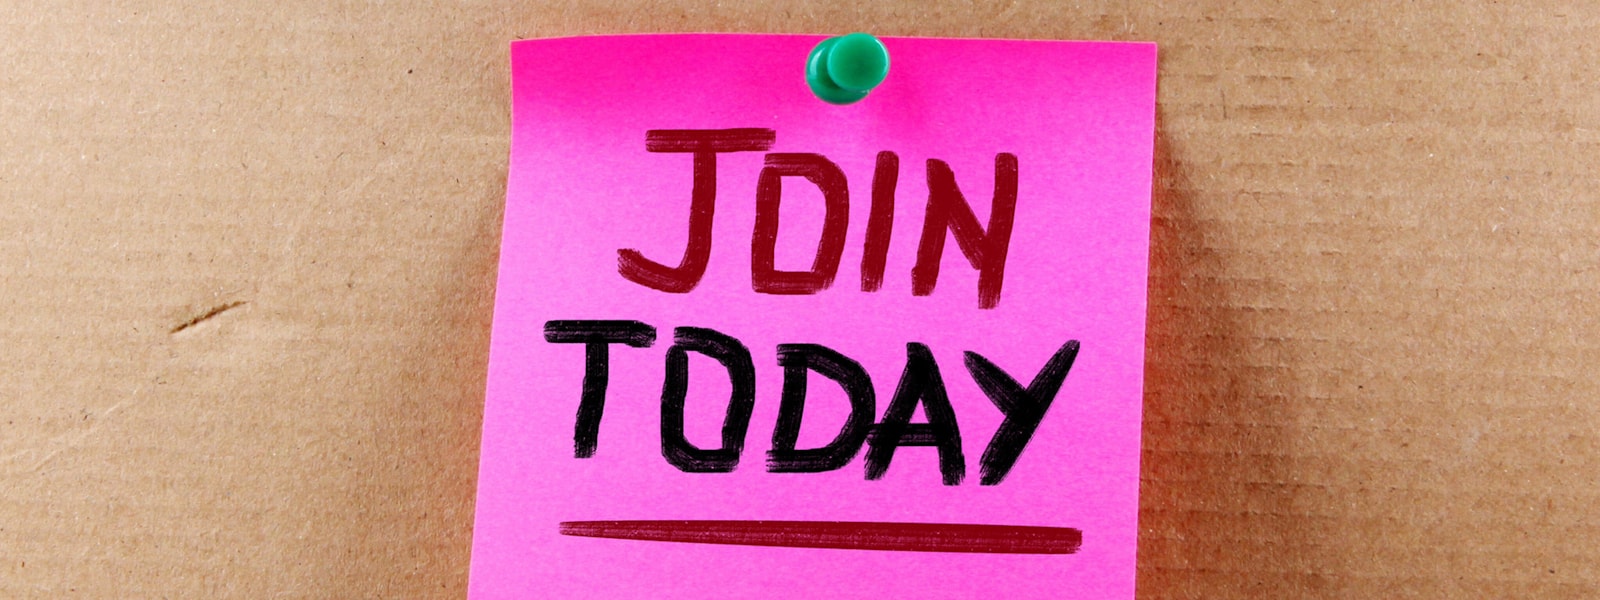 join today written on a post-it note